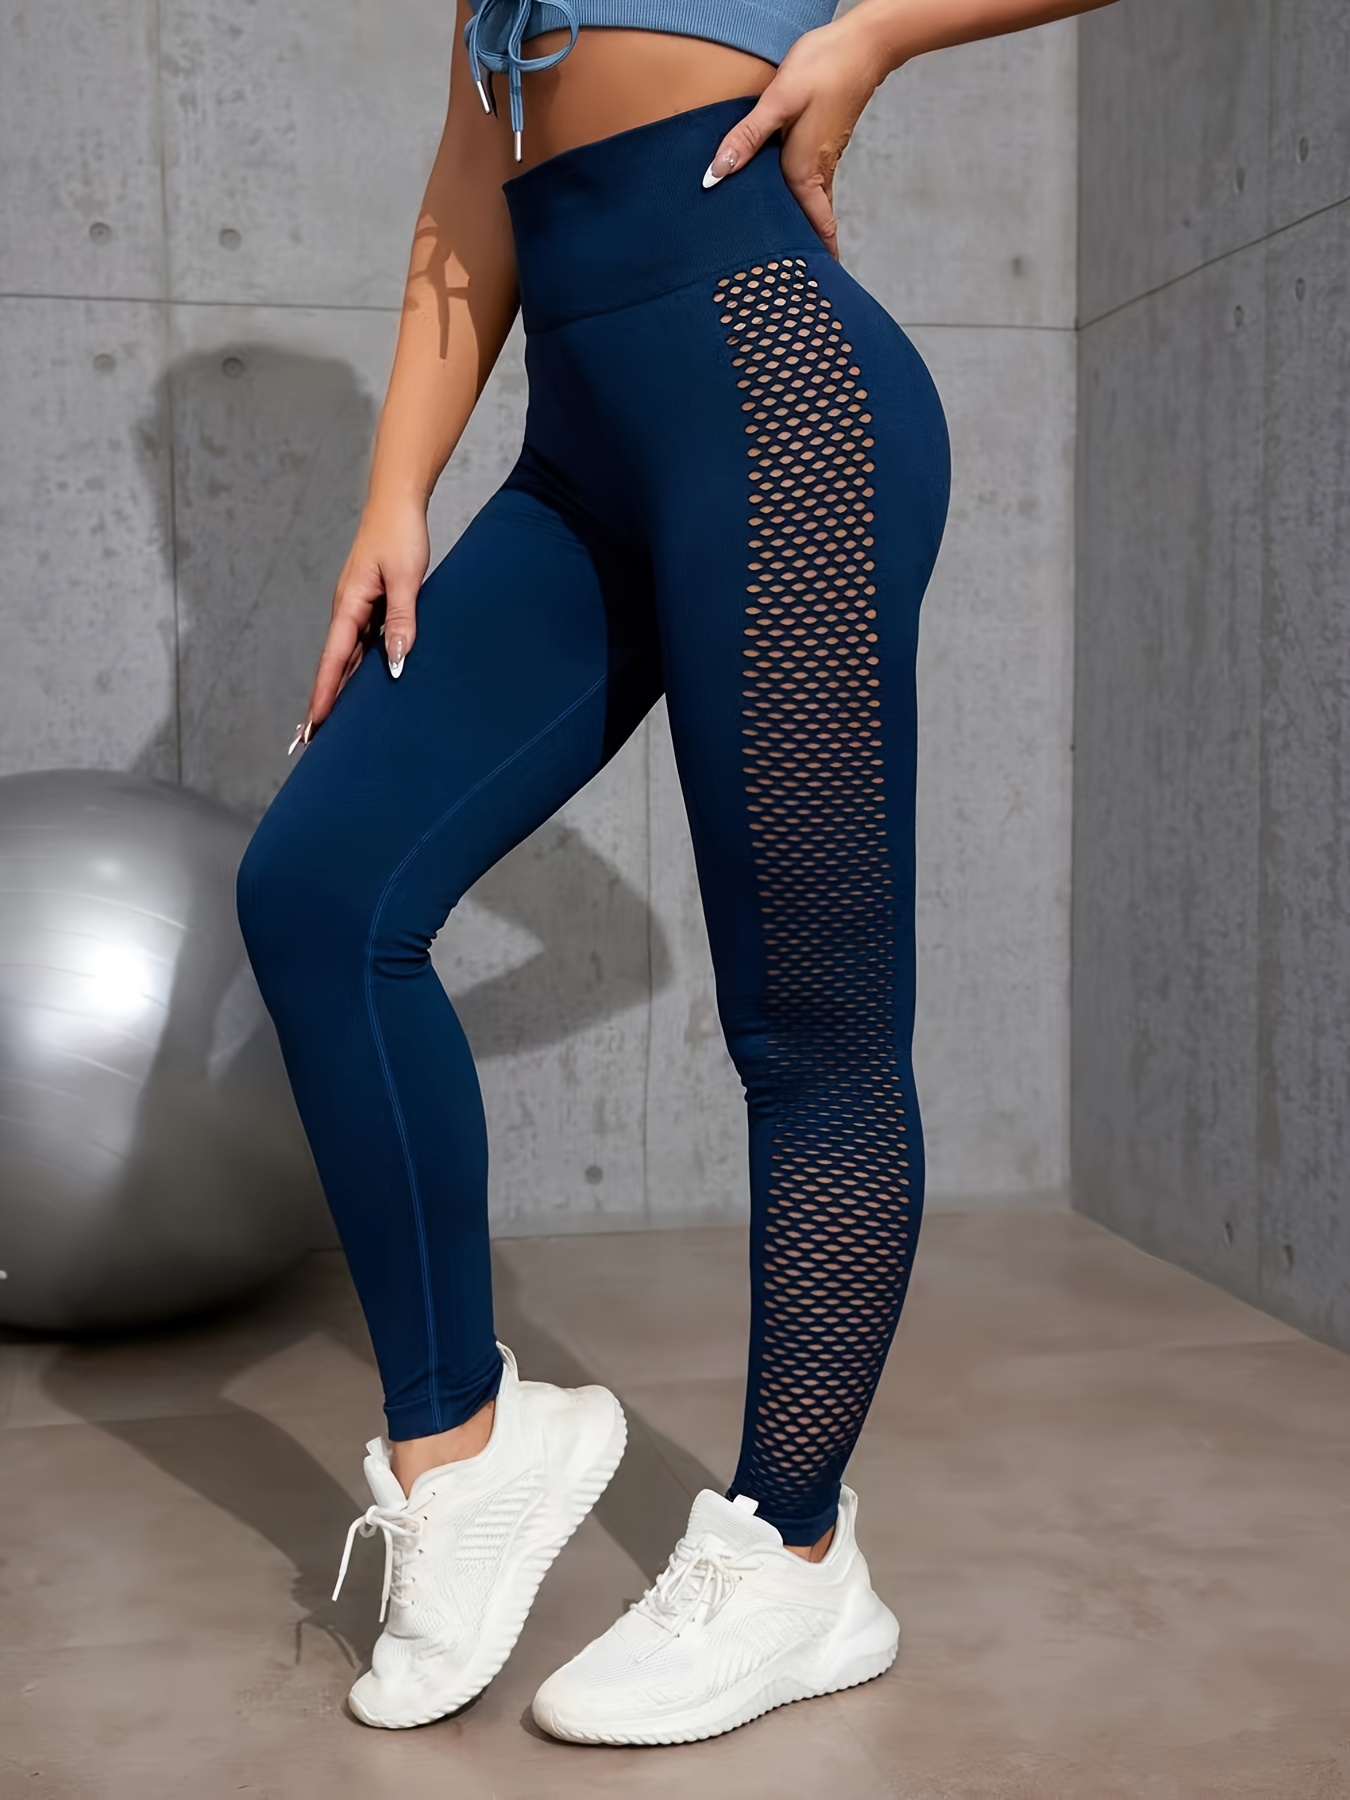 Women Sexy See-through Leggings Bandage Stitching Running Yoga Outwear  Sports Casual Skinny Pants, Women's Fashion, Activewear on Carousell